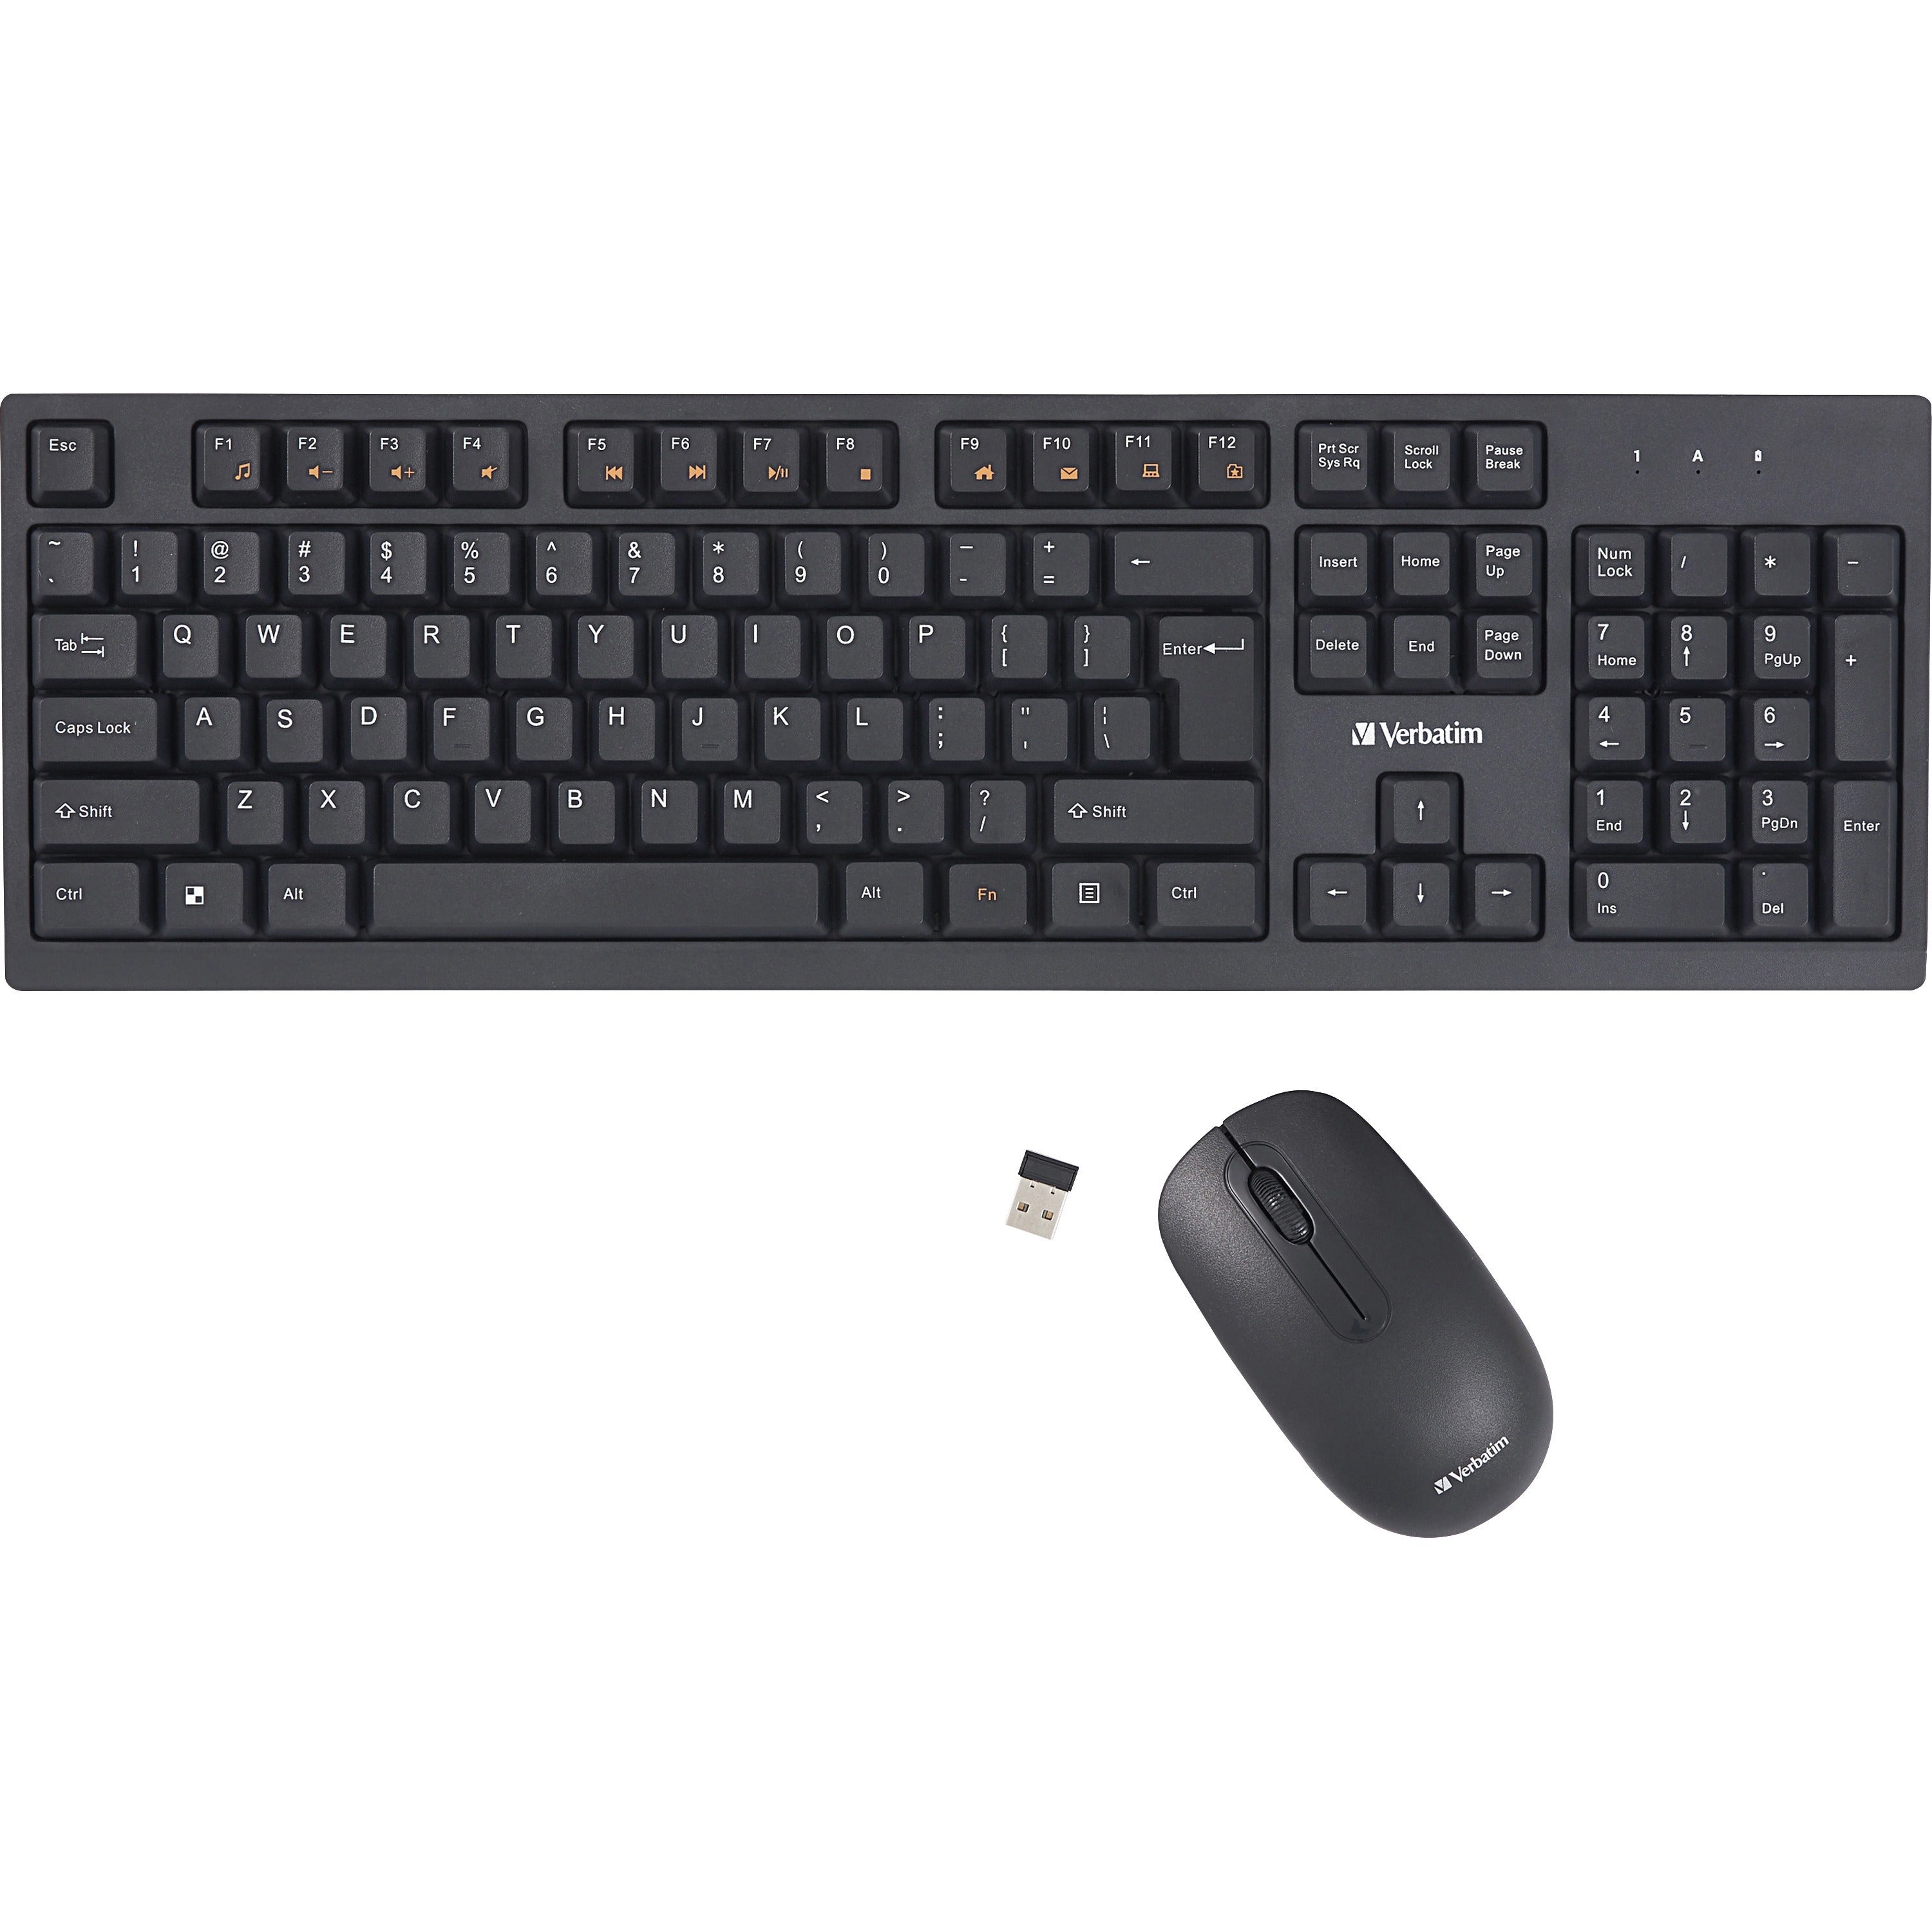 verbatim-wireless-keyboard-and-mouse-usb-type-a-wireless-bluetooth-240-ghz-keyboard-usb-type-a-wireless-mouse-optical-1000-dpi-3-button-multimedia-hot-keys-symmetrical-aa-aaa-compatible-with-windows-mac_ver70724 - 1